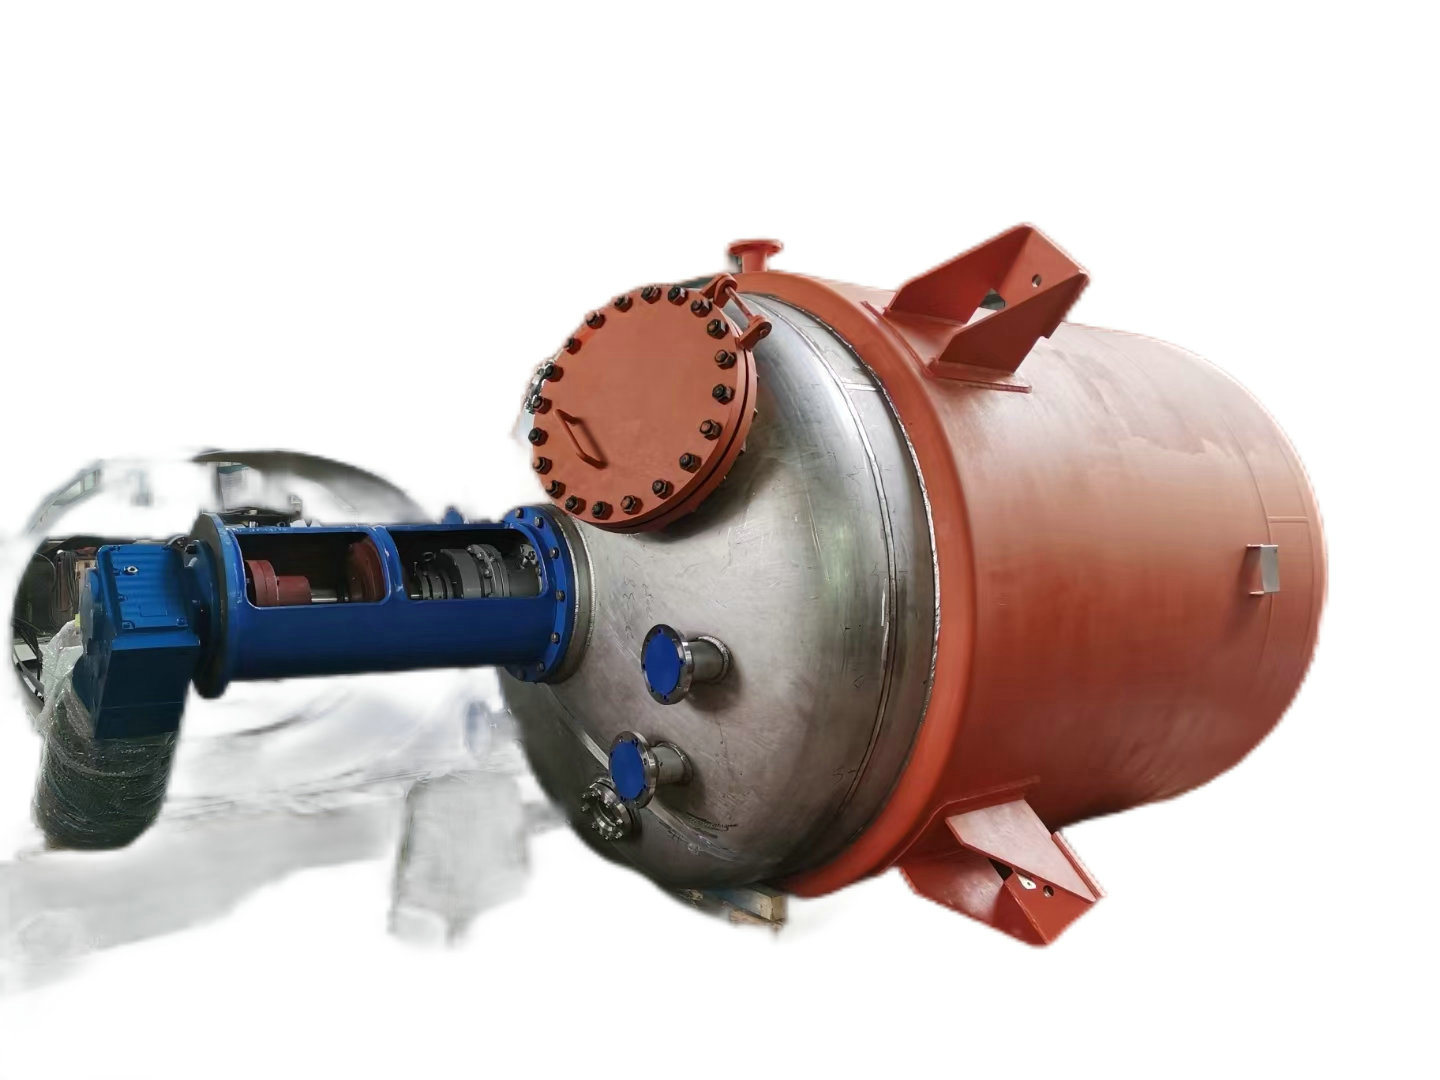 Dual-Phase Stainless Steel Tank Autoclave Reactor 5000L-15000L ( Reaction Pressure Vessel)